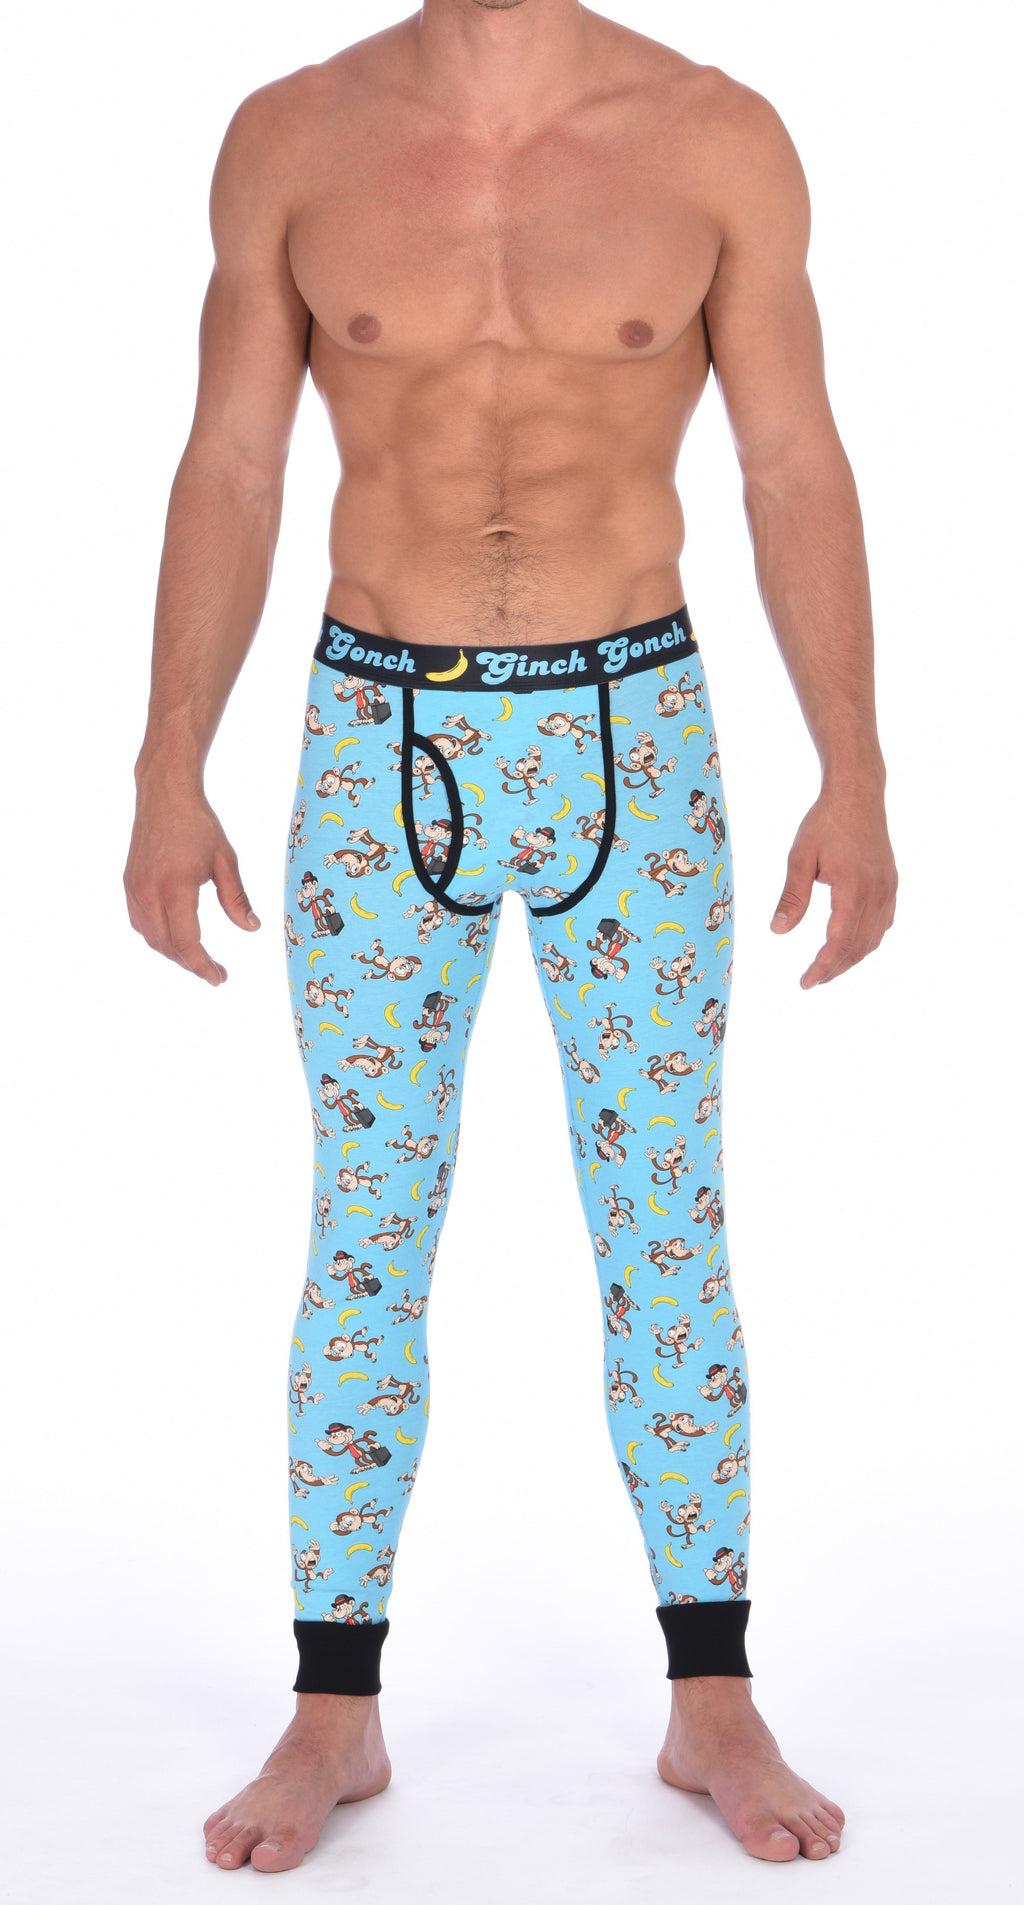 Ginch Gonch Monkey Business Men's Leggings Long Johns Underwear with blue background, monkeys, and bananas. Black trim and printed waistband with Ginch Gonch and bananas. Front.